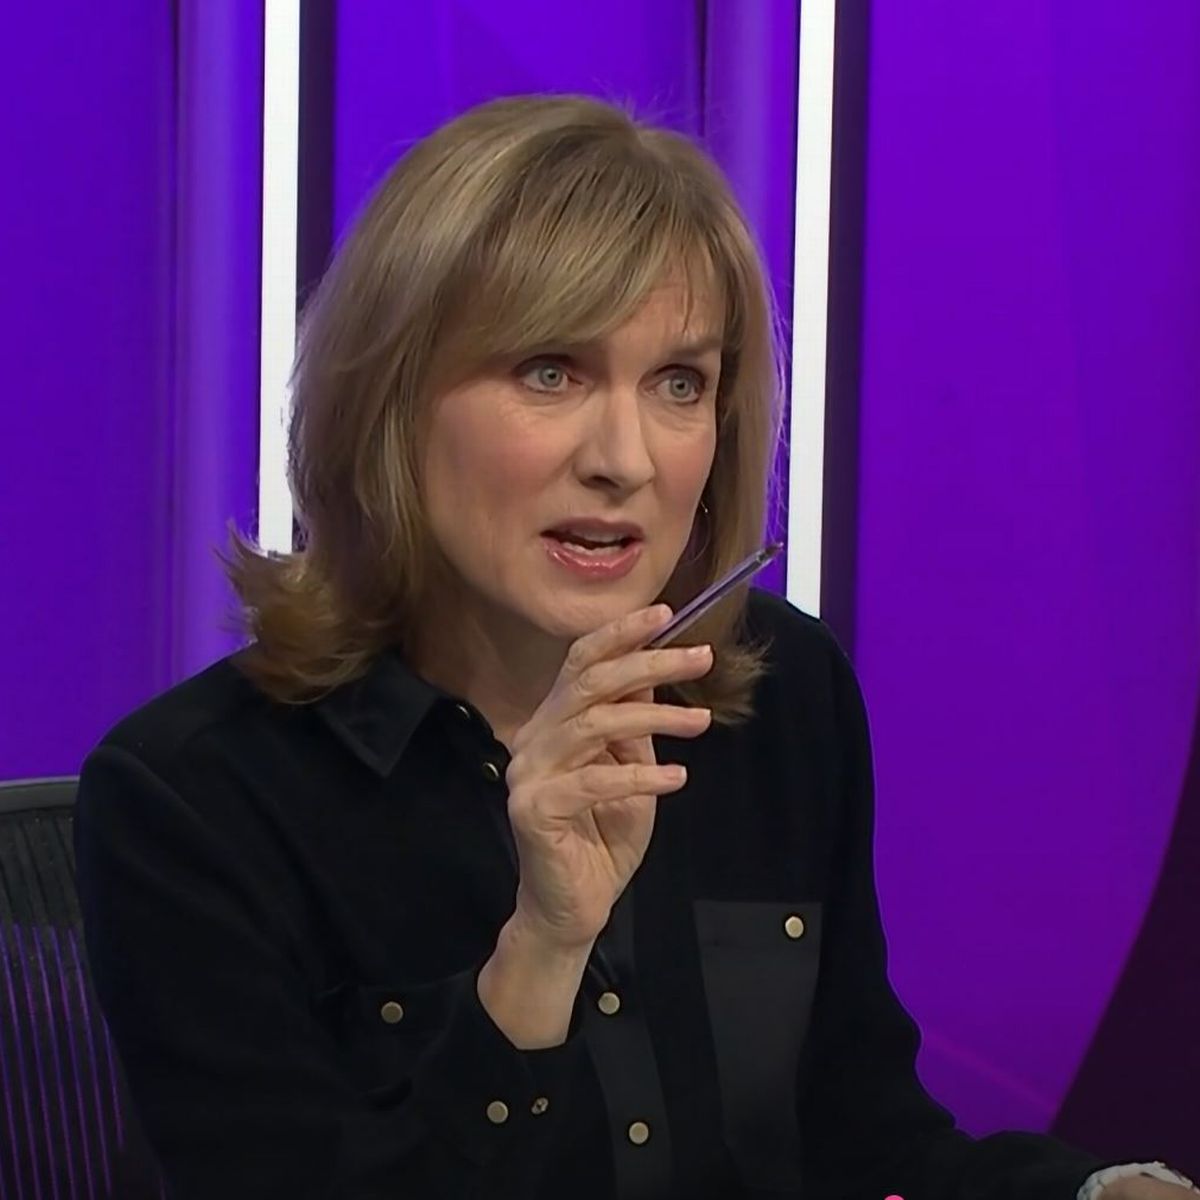 ... and it's that time of the week when I ask - 'Do I watch #bbcqt on catch up? - or will it just push me to throw my TV out of the window whilst shouting 'Fiona Bruce you FKING arsehole!!' 🤷🤔☺️ #ToryCorruption #bbcbias